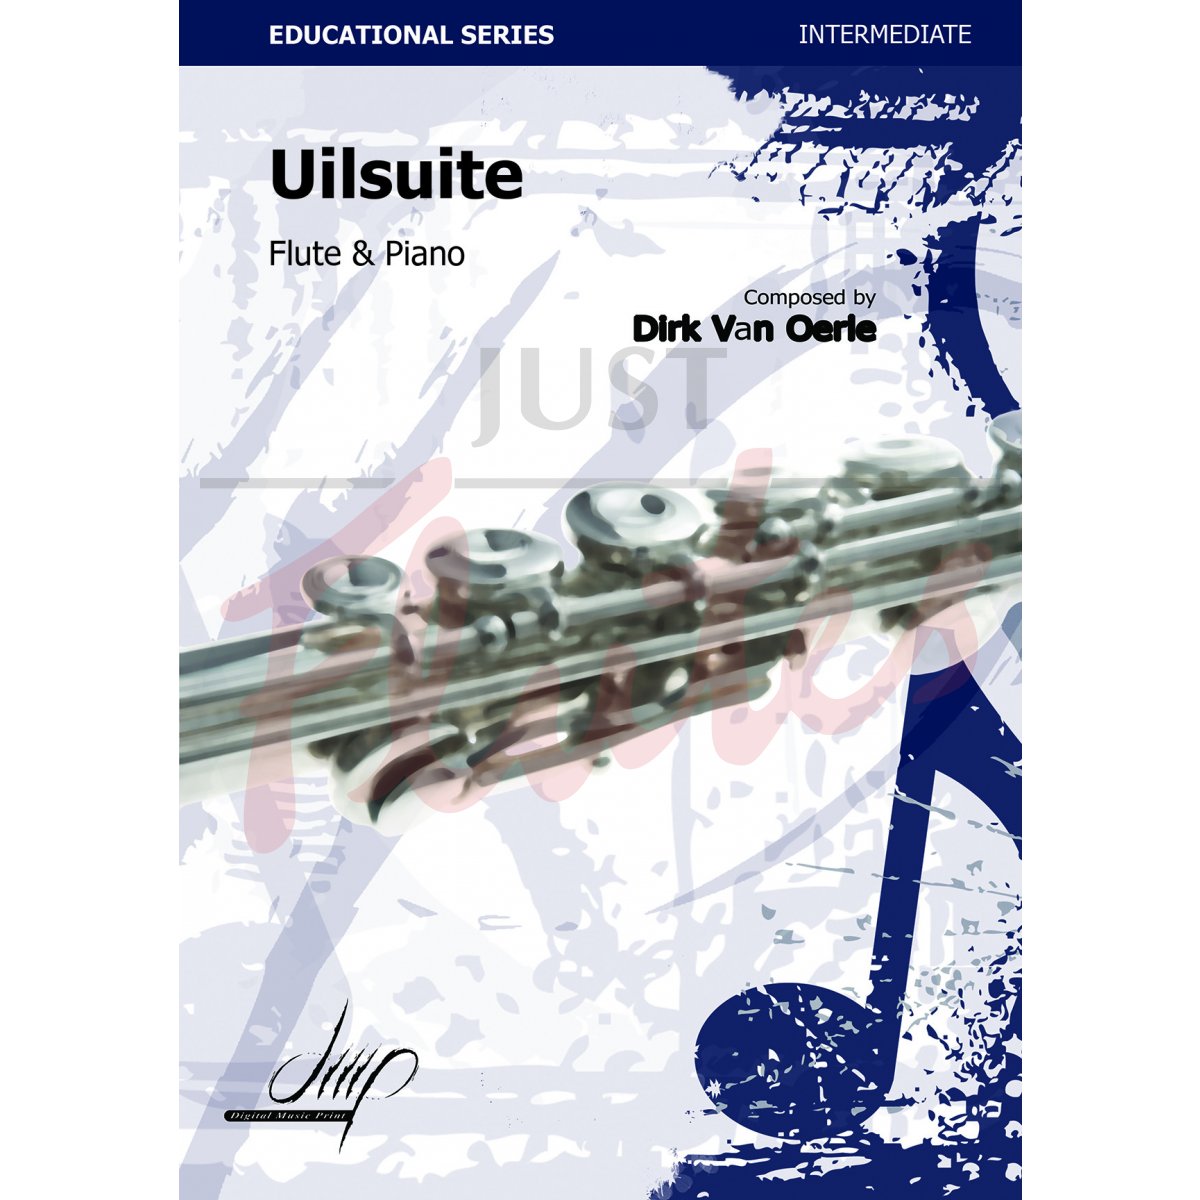 Uilsuite for flute and piano